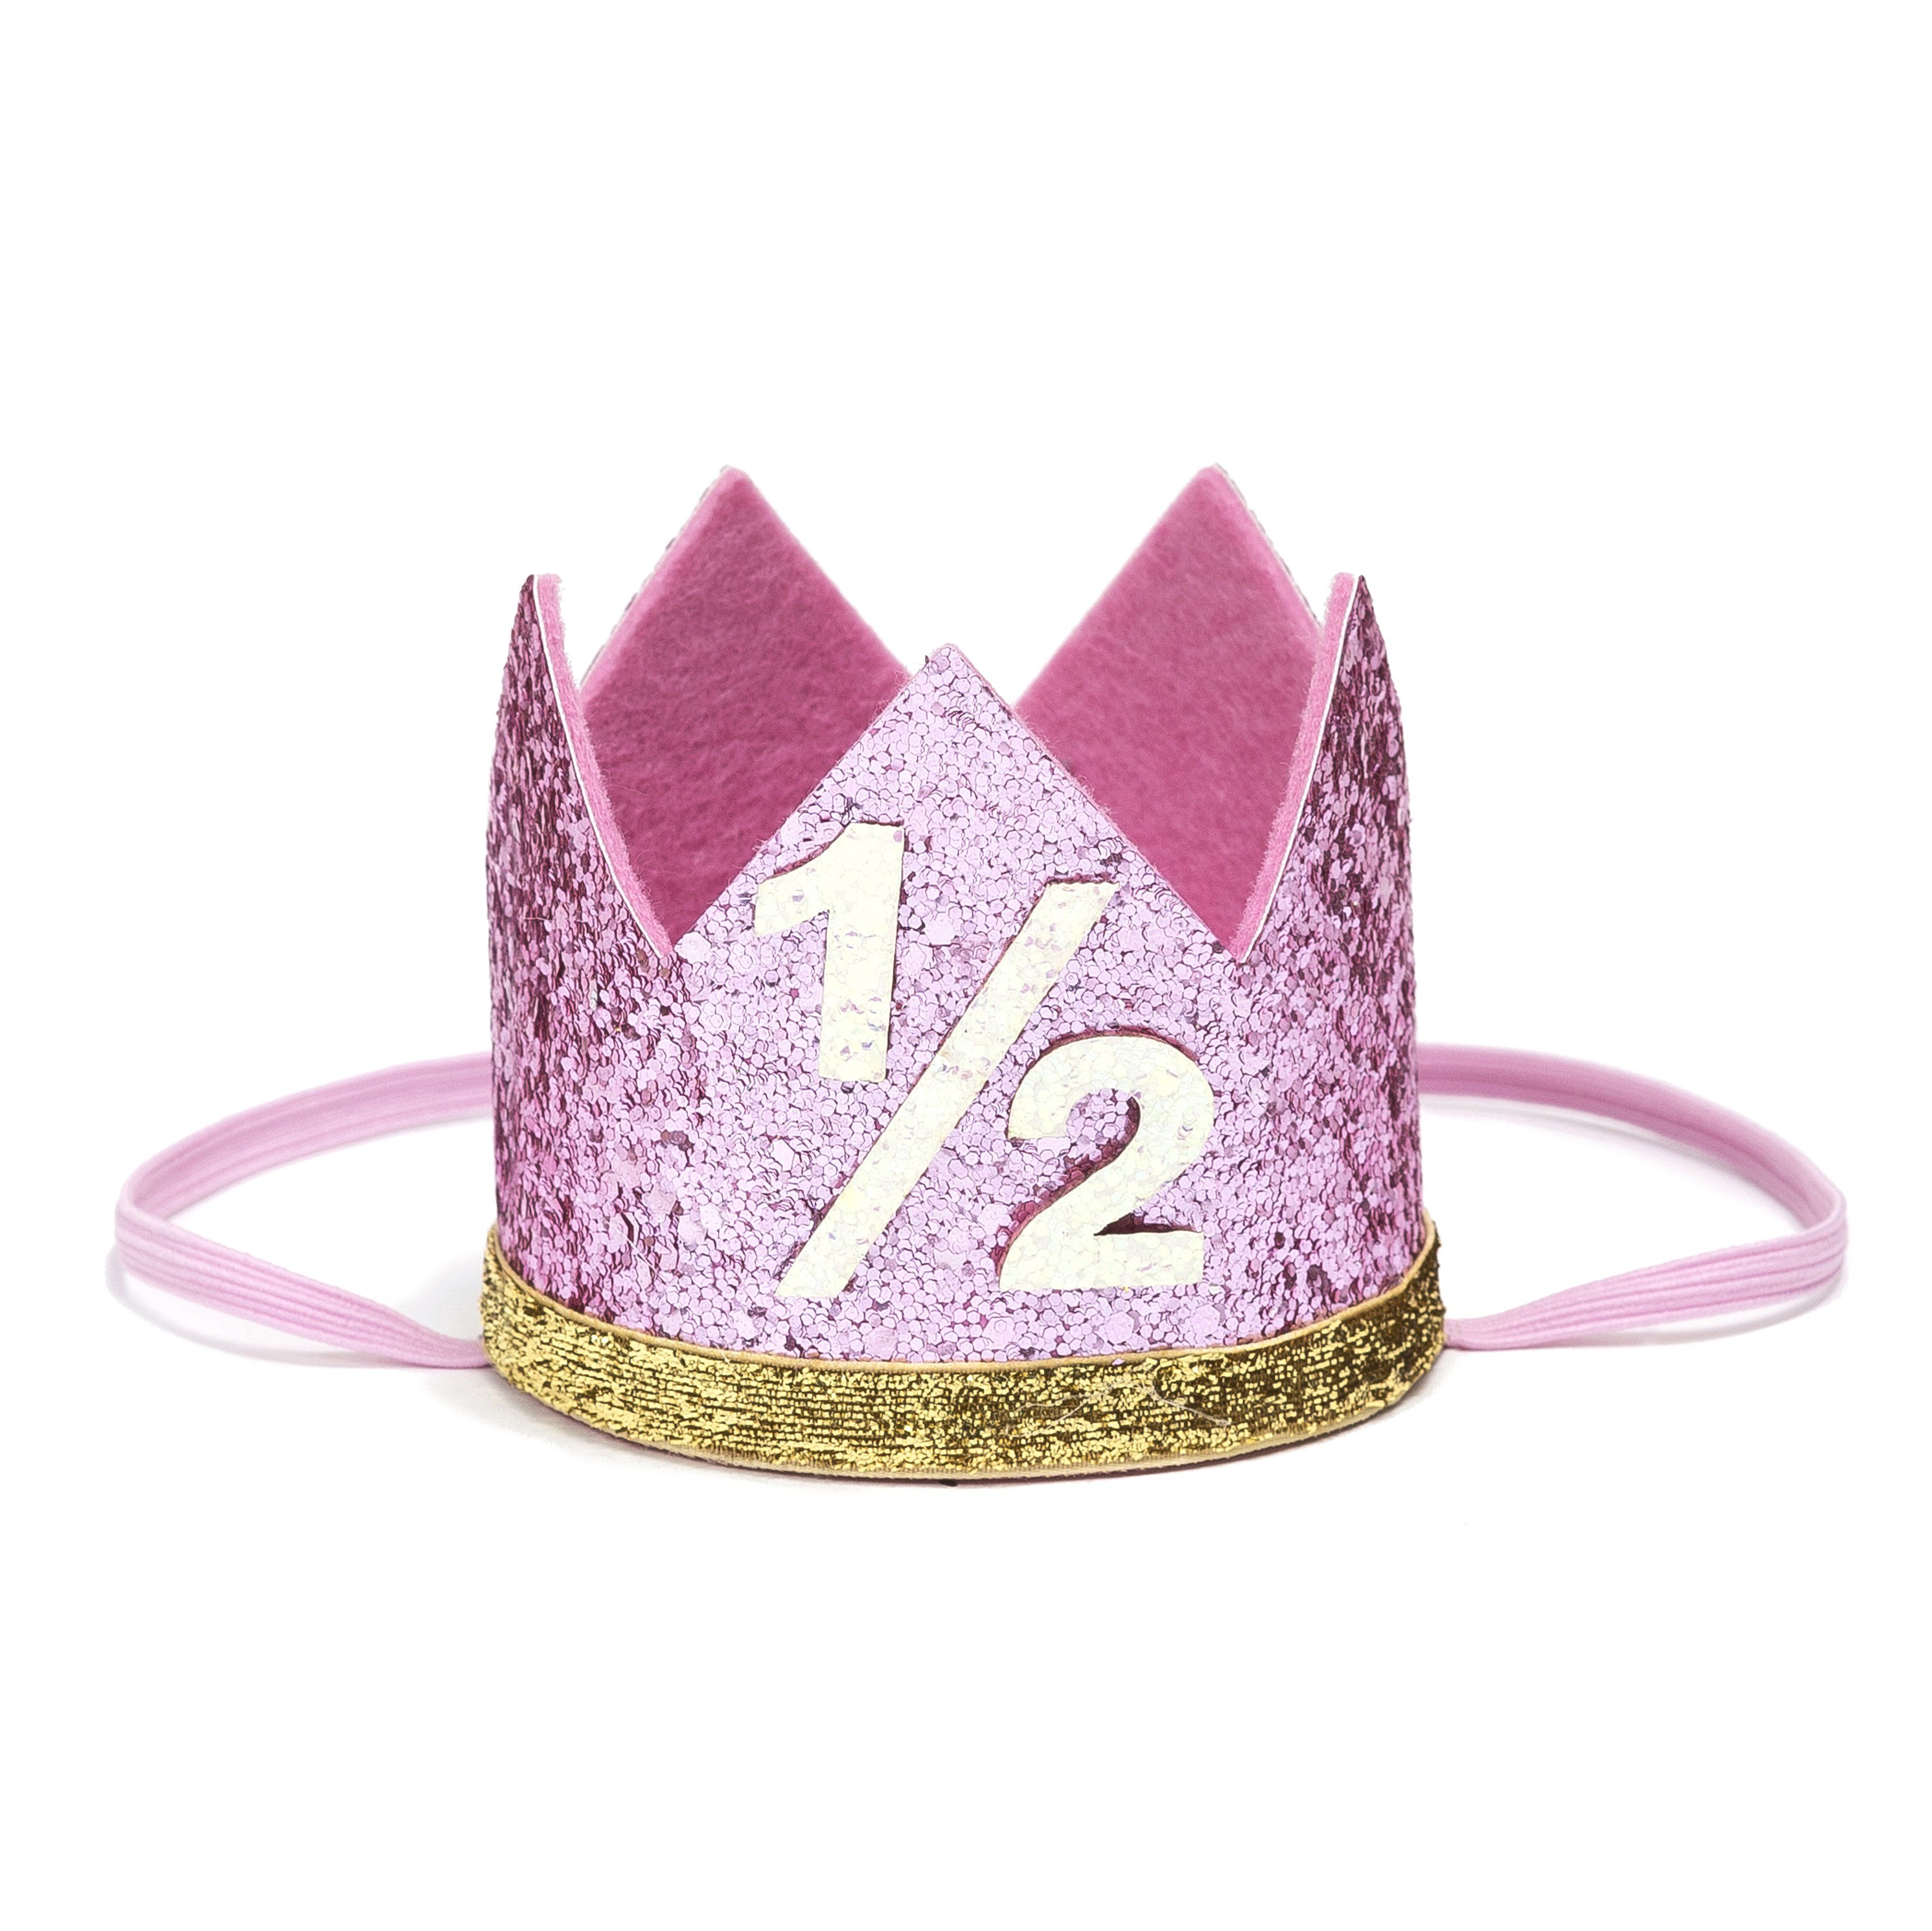 Birthday Party Crown - Pink + Gold Glitter - 1/2